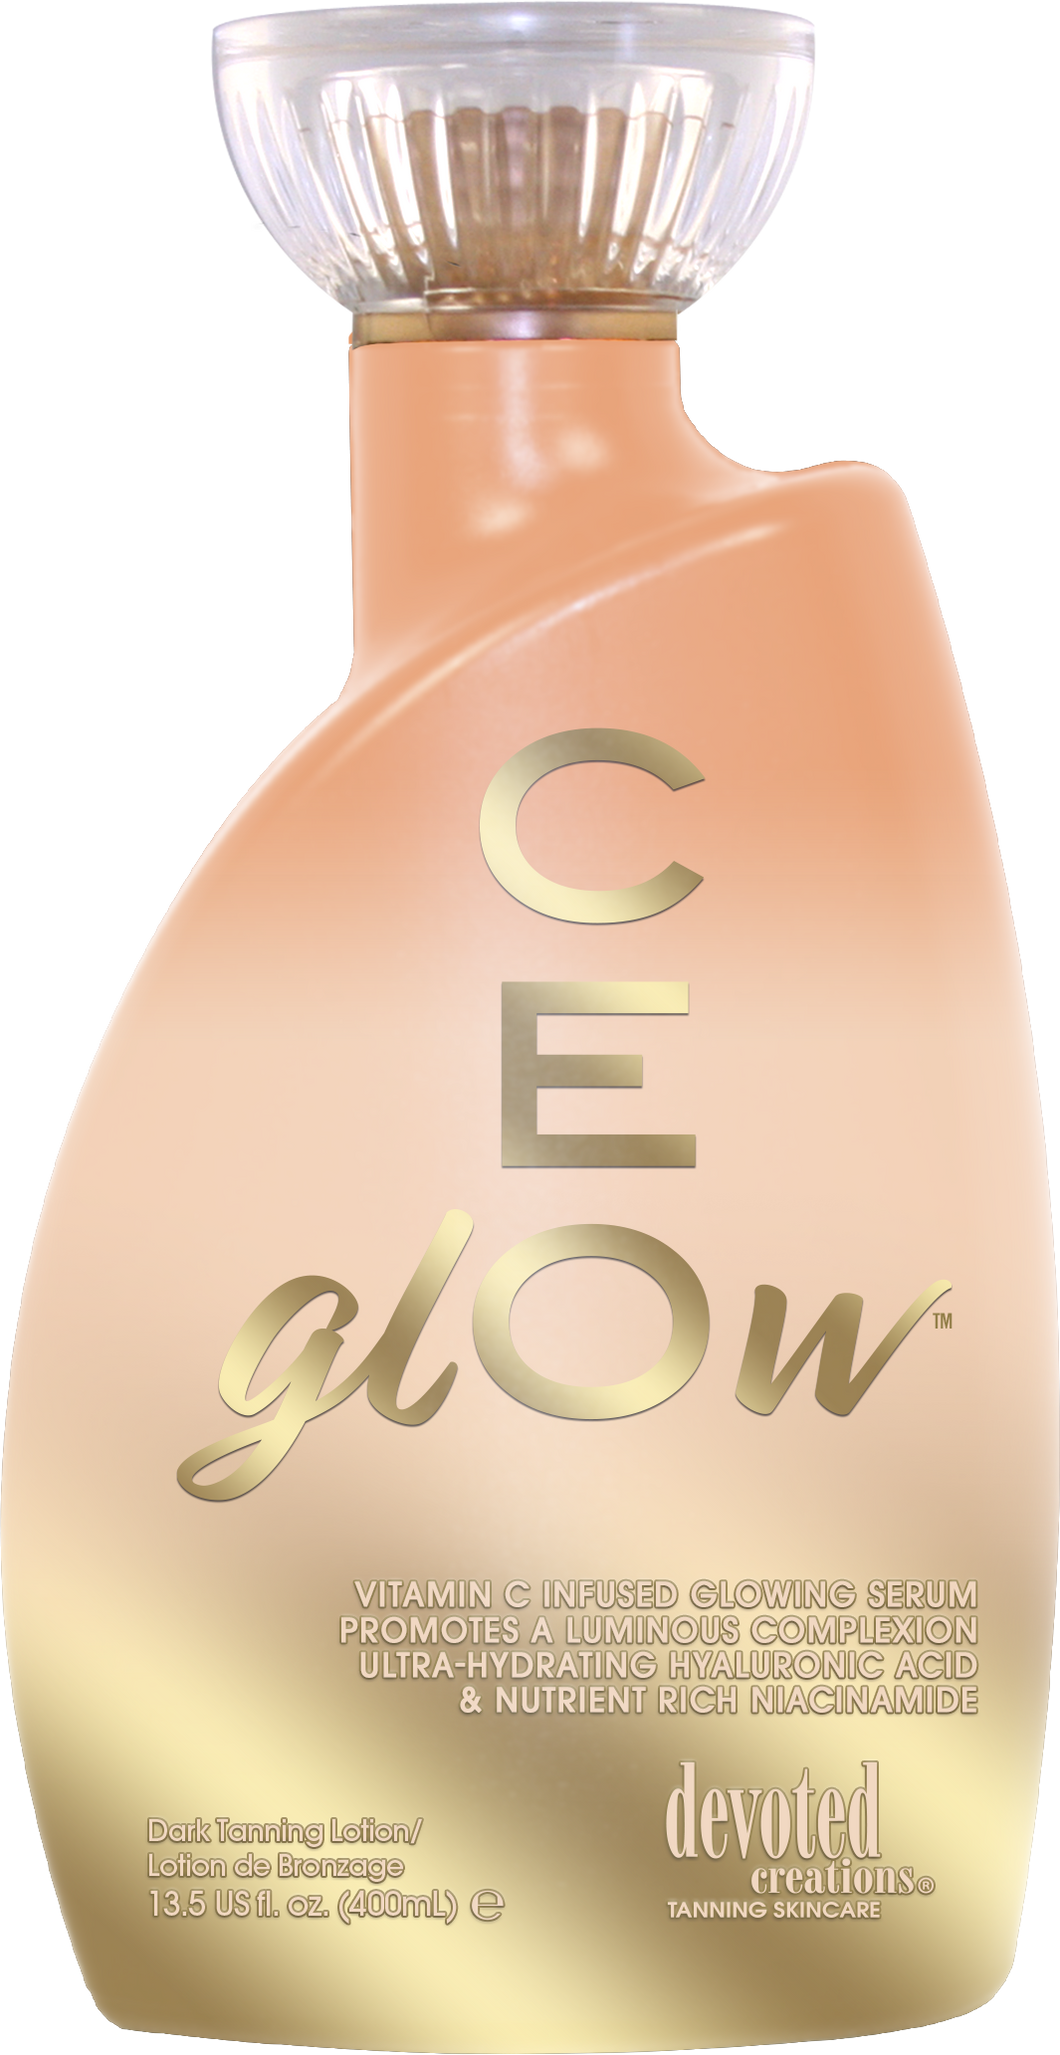 Devoted Creations | CE Glow